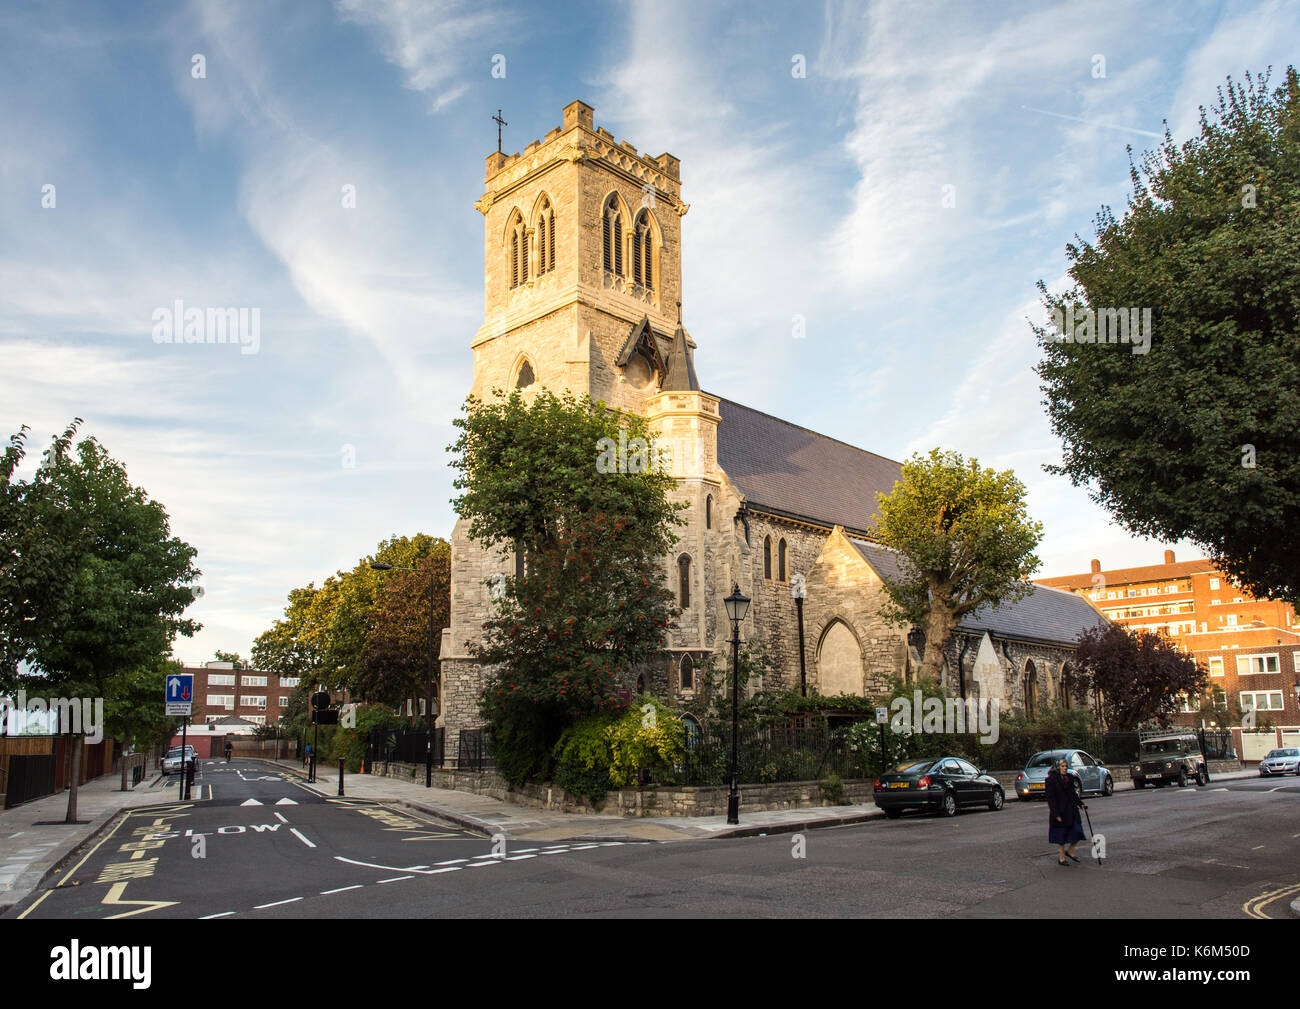 London, England, UK - September 29, 2016: Evening sun illuminates the tower and west face of Holy Trinity With St Barnabas Church on Hartland Road in  Stock Photo